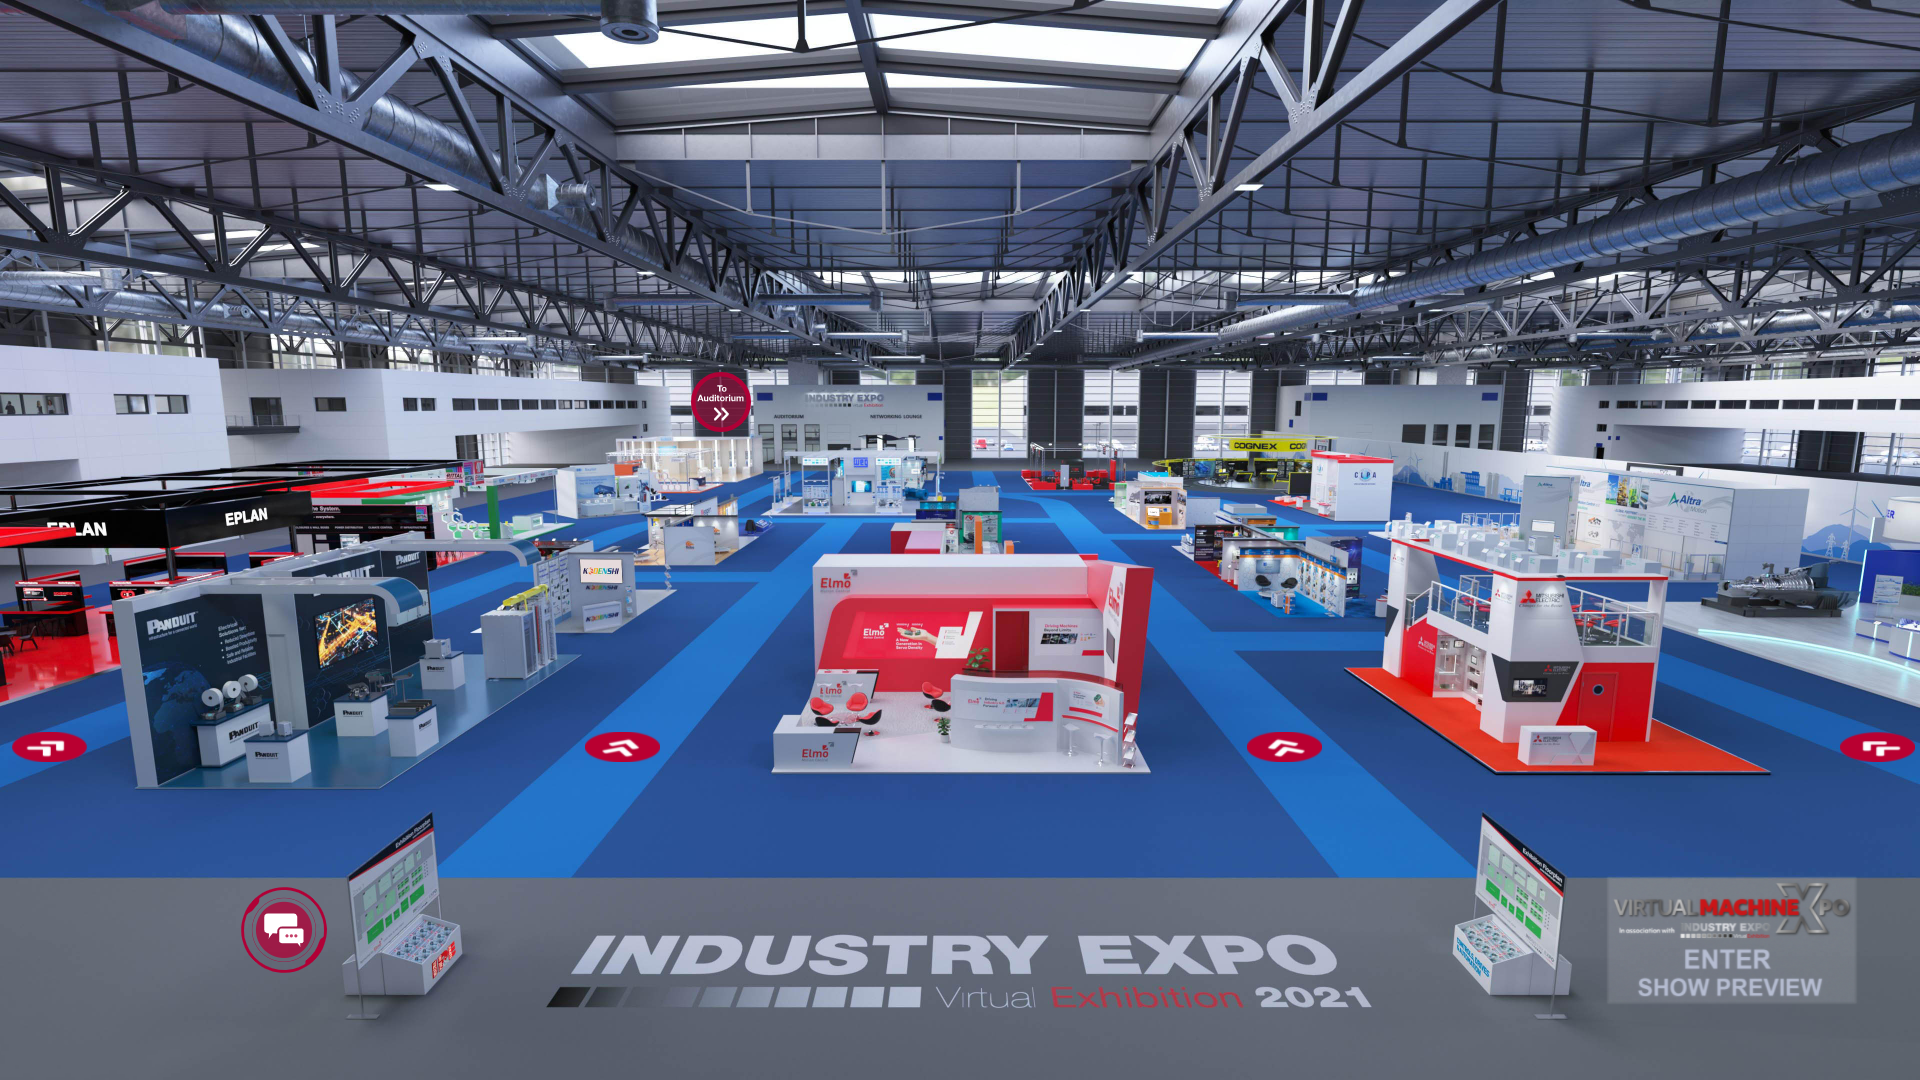 The world’s first fully 3D navigable virtual exhibition has renewed its trade show floor.